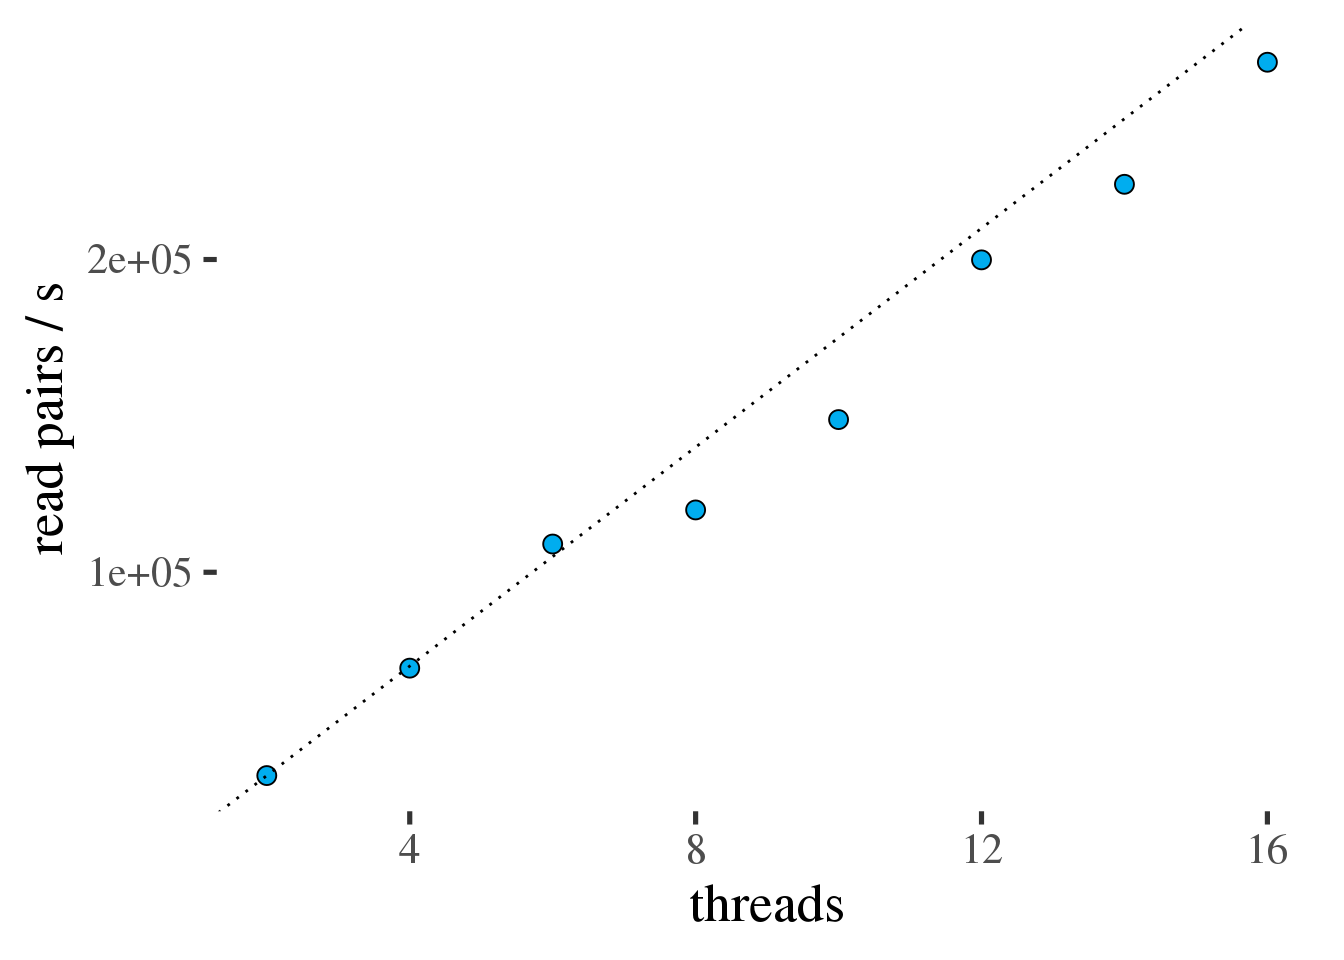 Throughput of samtools view in read pairs per second as a function of the number of threads. Ideal scaling is shown as a dotted line.